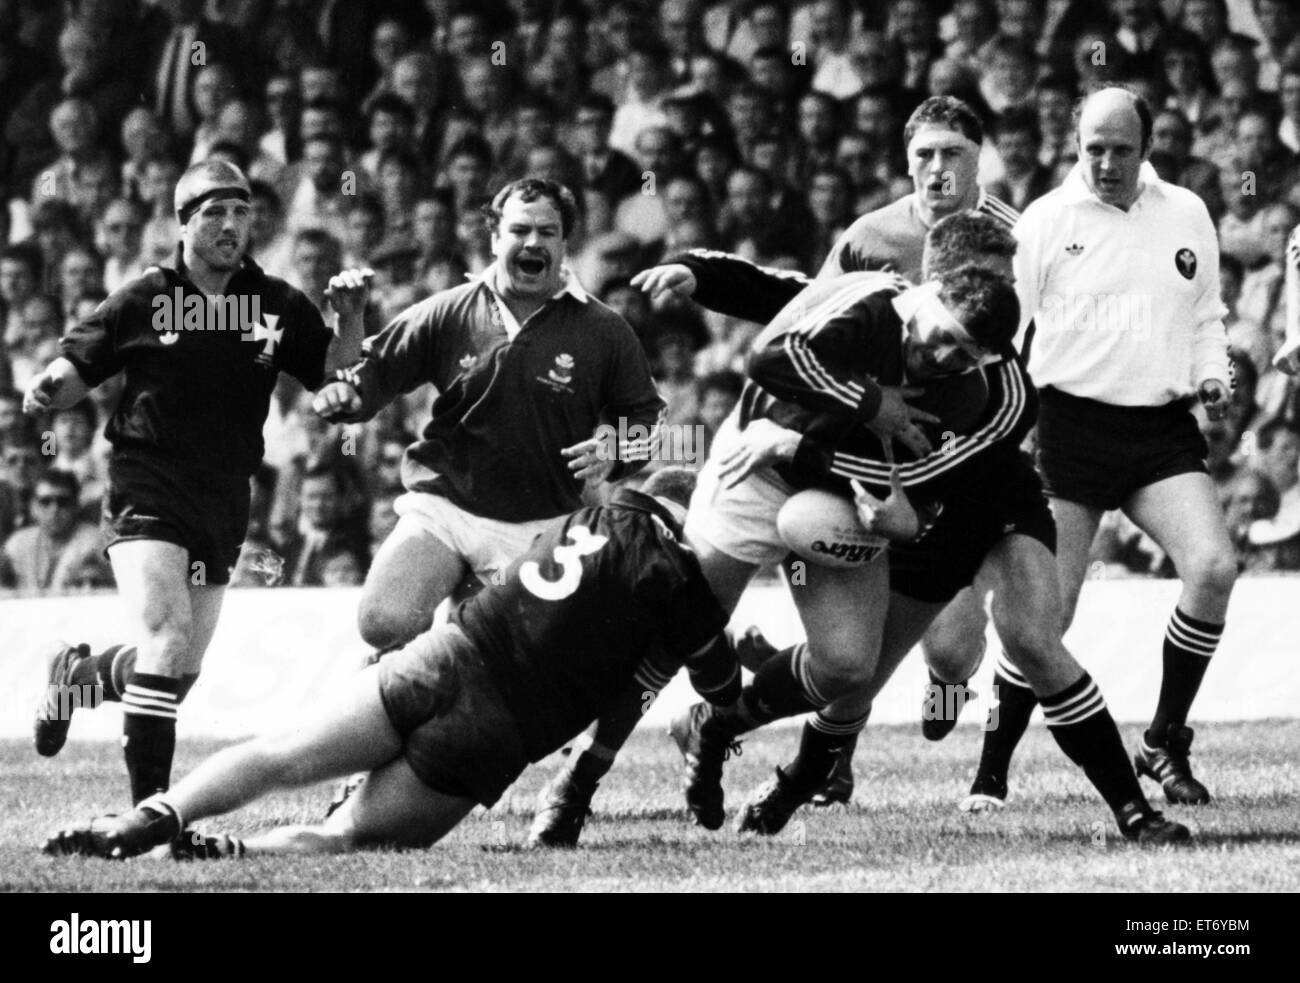 Welsh Rugby Union Final - Neath 14 - 13 Llanelli. Llanelli's Anthony Buchanan is stopped by Neath defence. 6th May 1989. Stock Photo